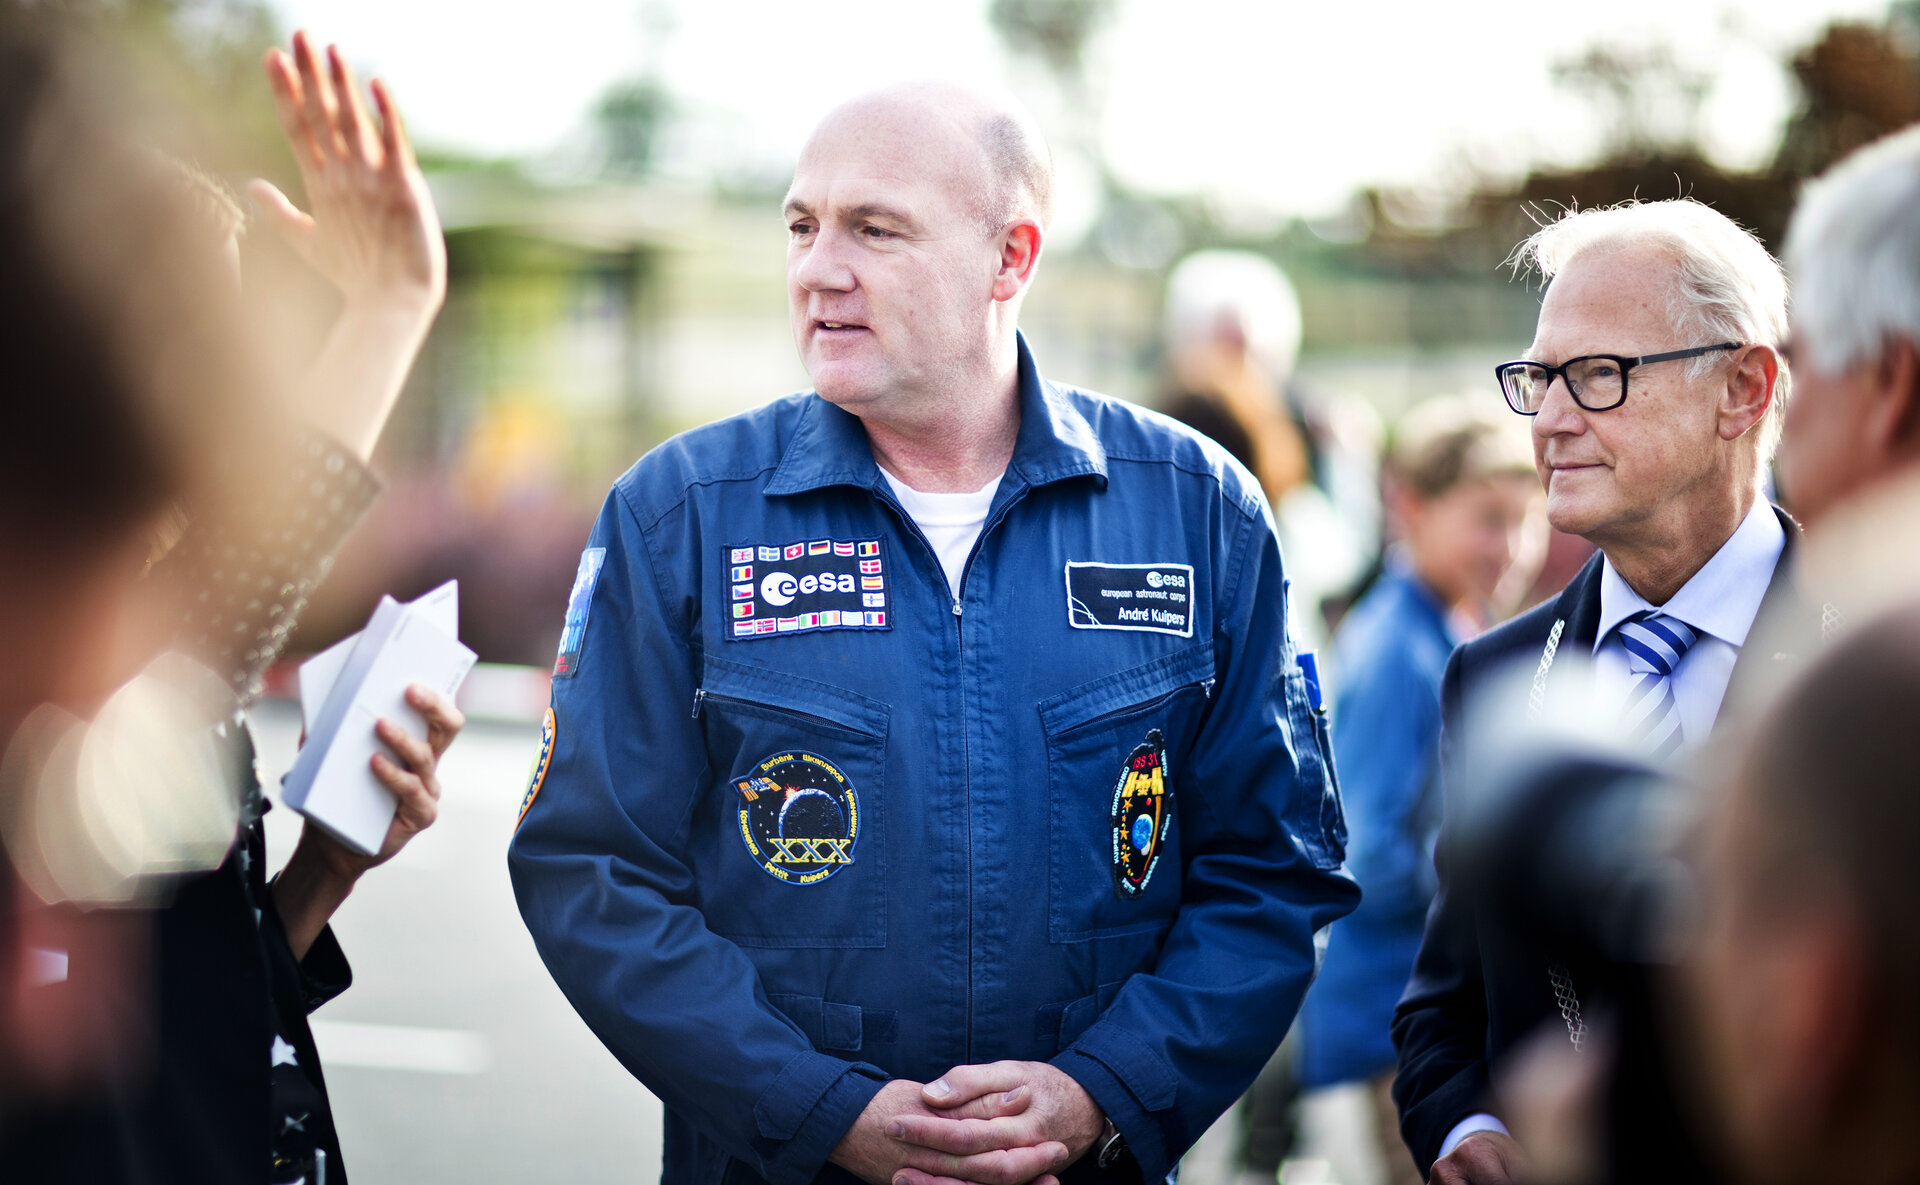 Andre Kuipers at the ESTEC Open Day 2013